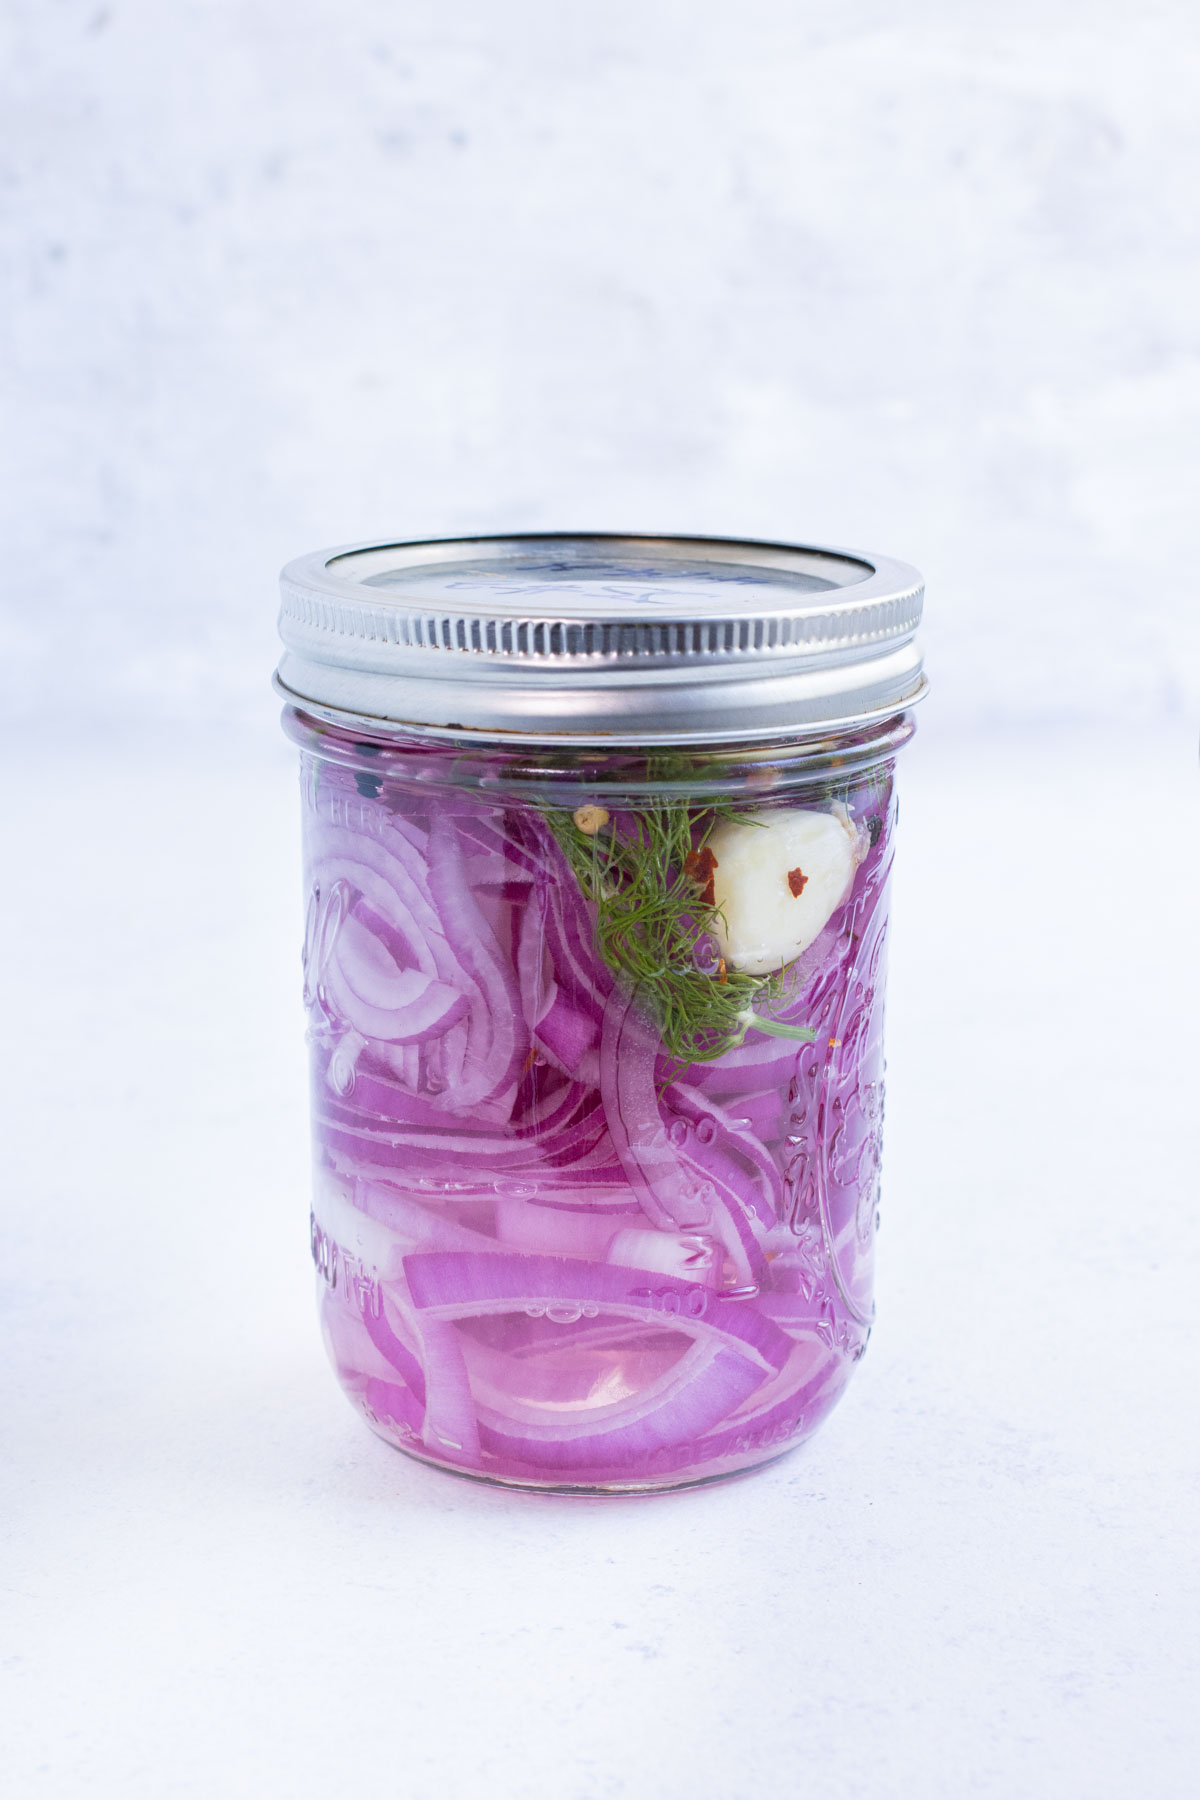 A lid is tightly sealed on a jar with pickled onions.